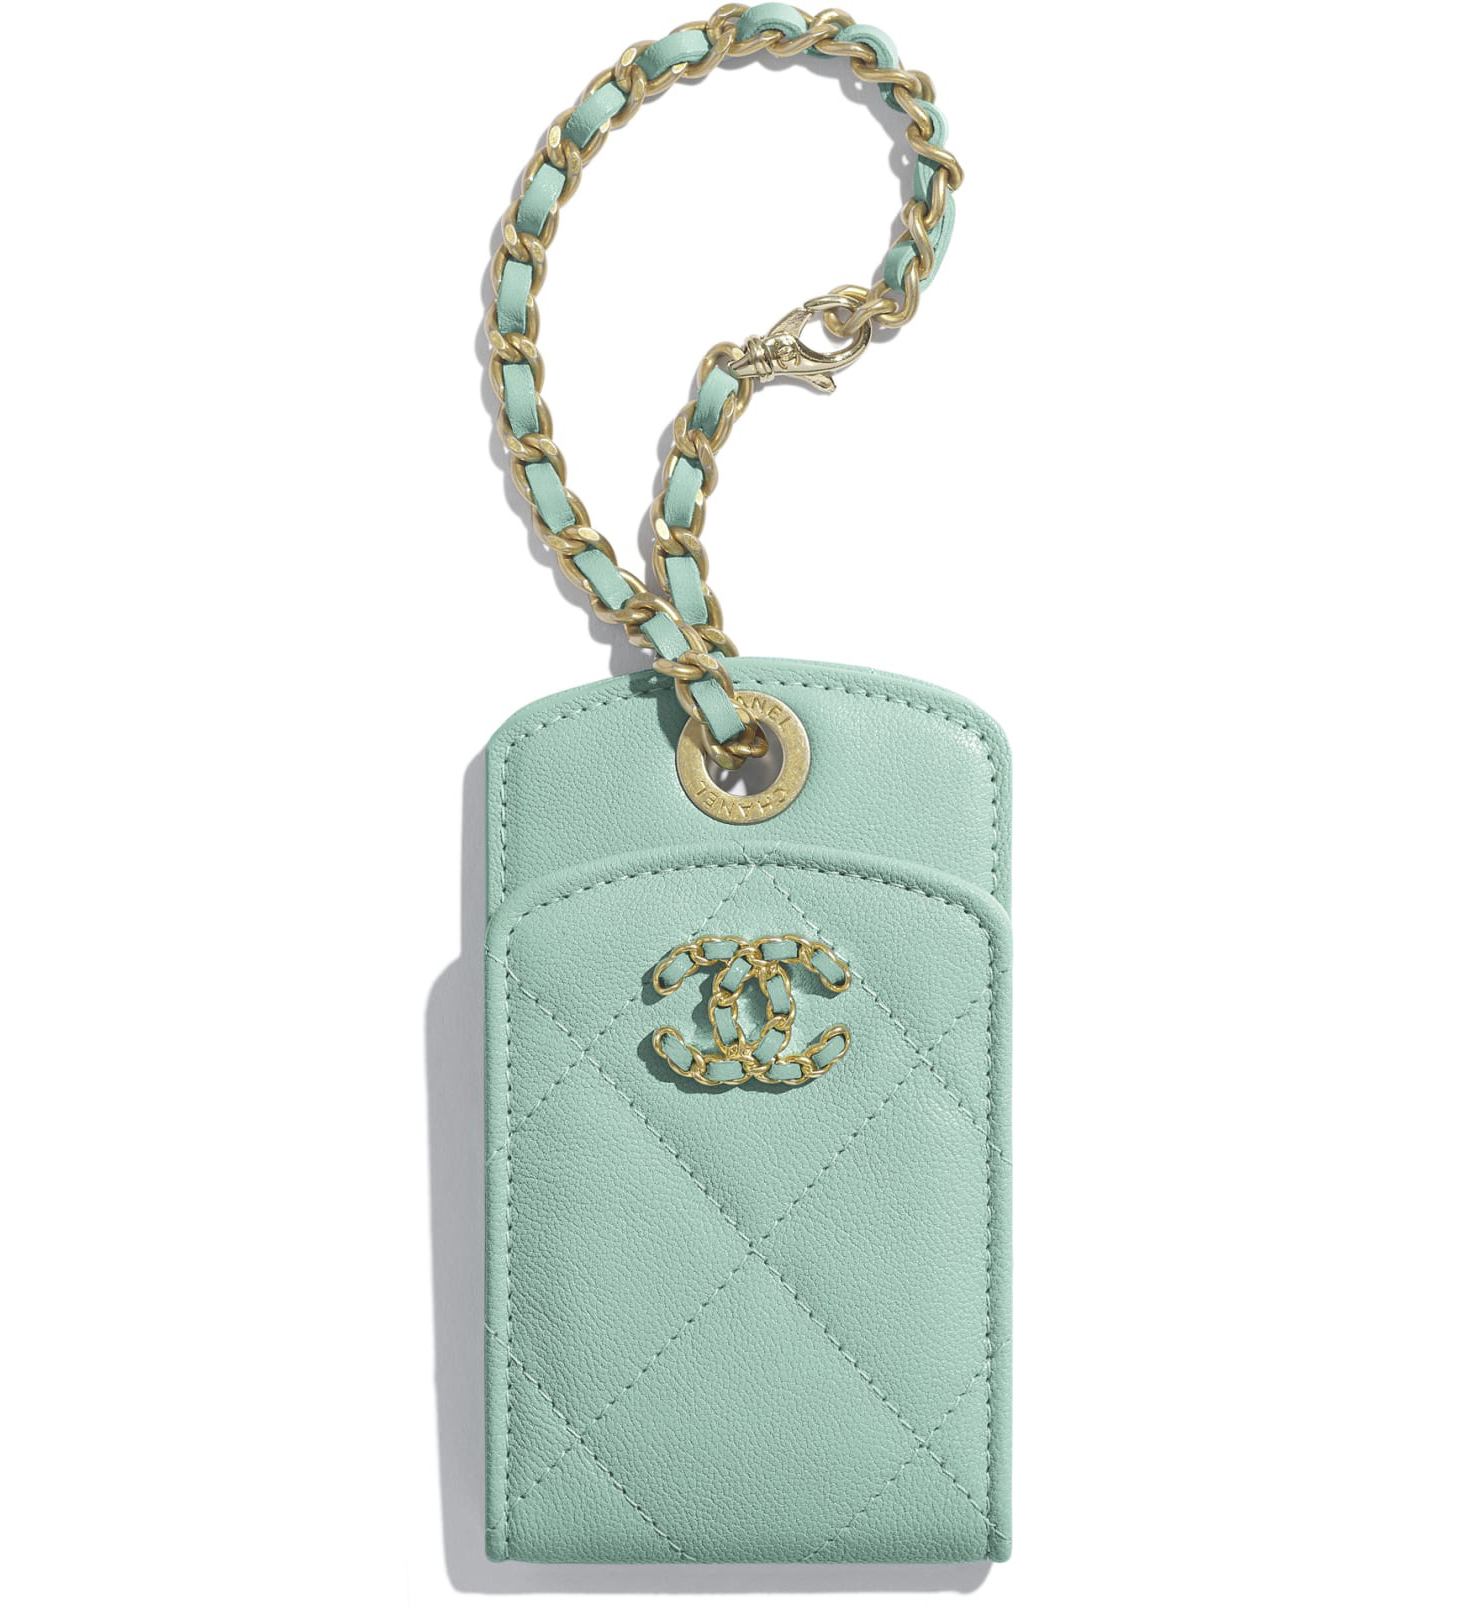 Top 75+ imagen chanel luggage tag